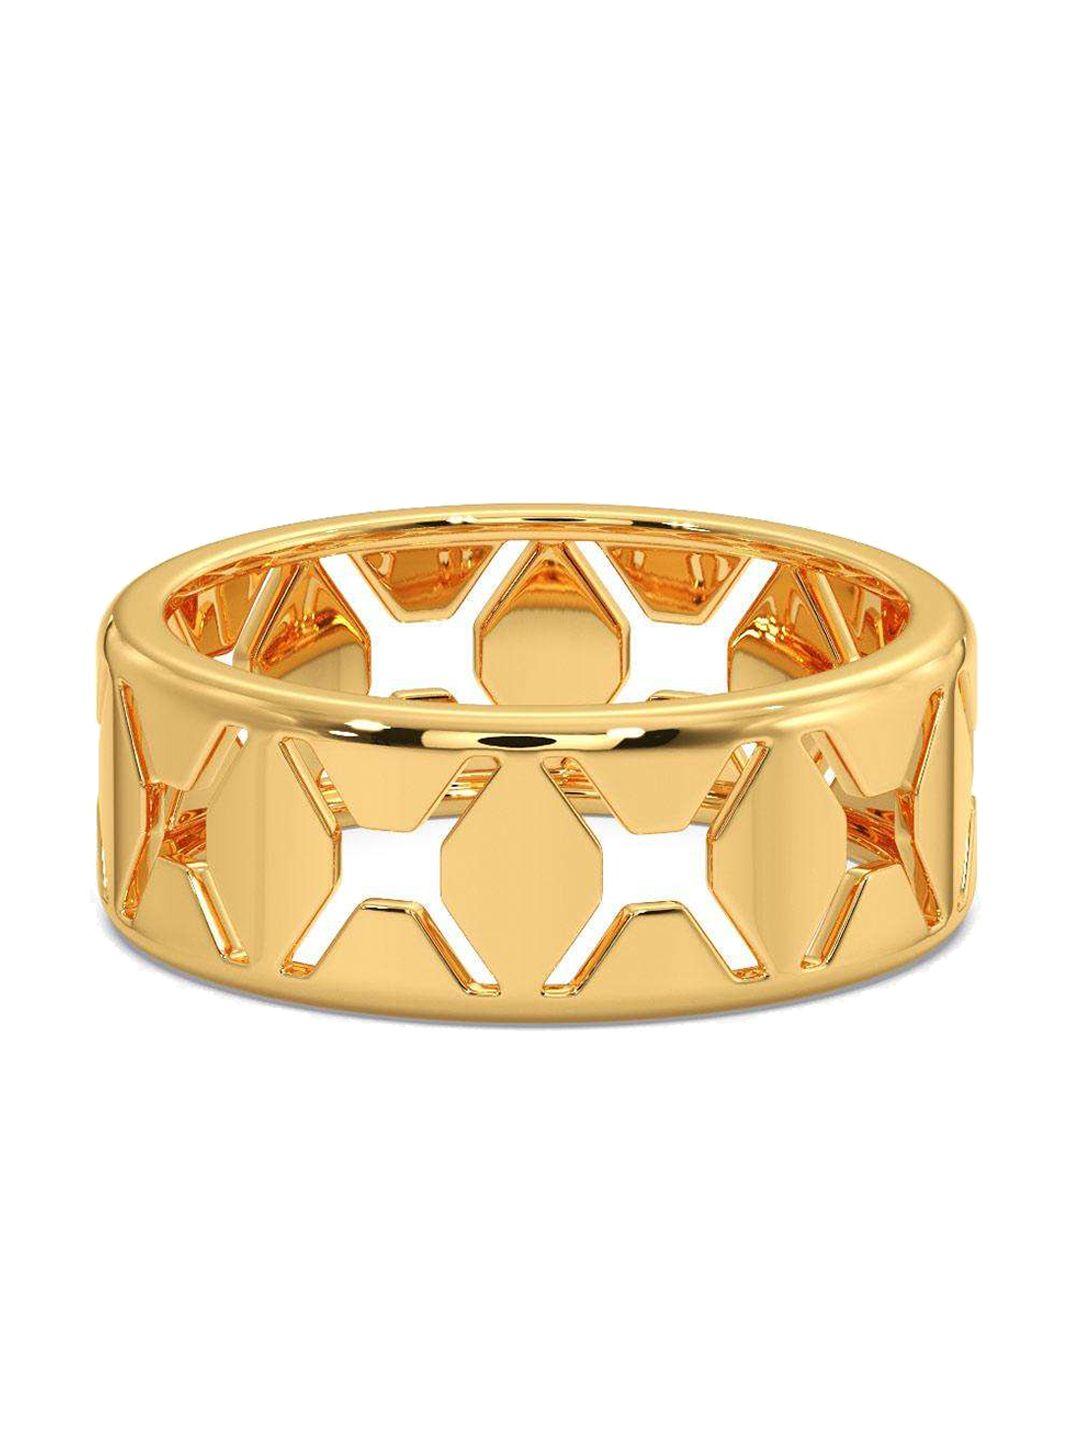 candere a kalyan jewellers company men 18kt gold ring - 5.01 gm